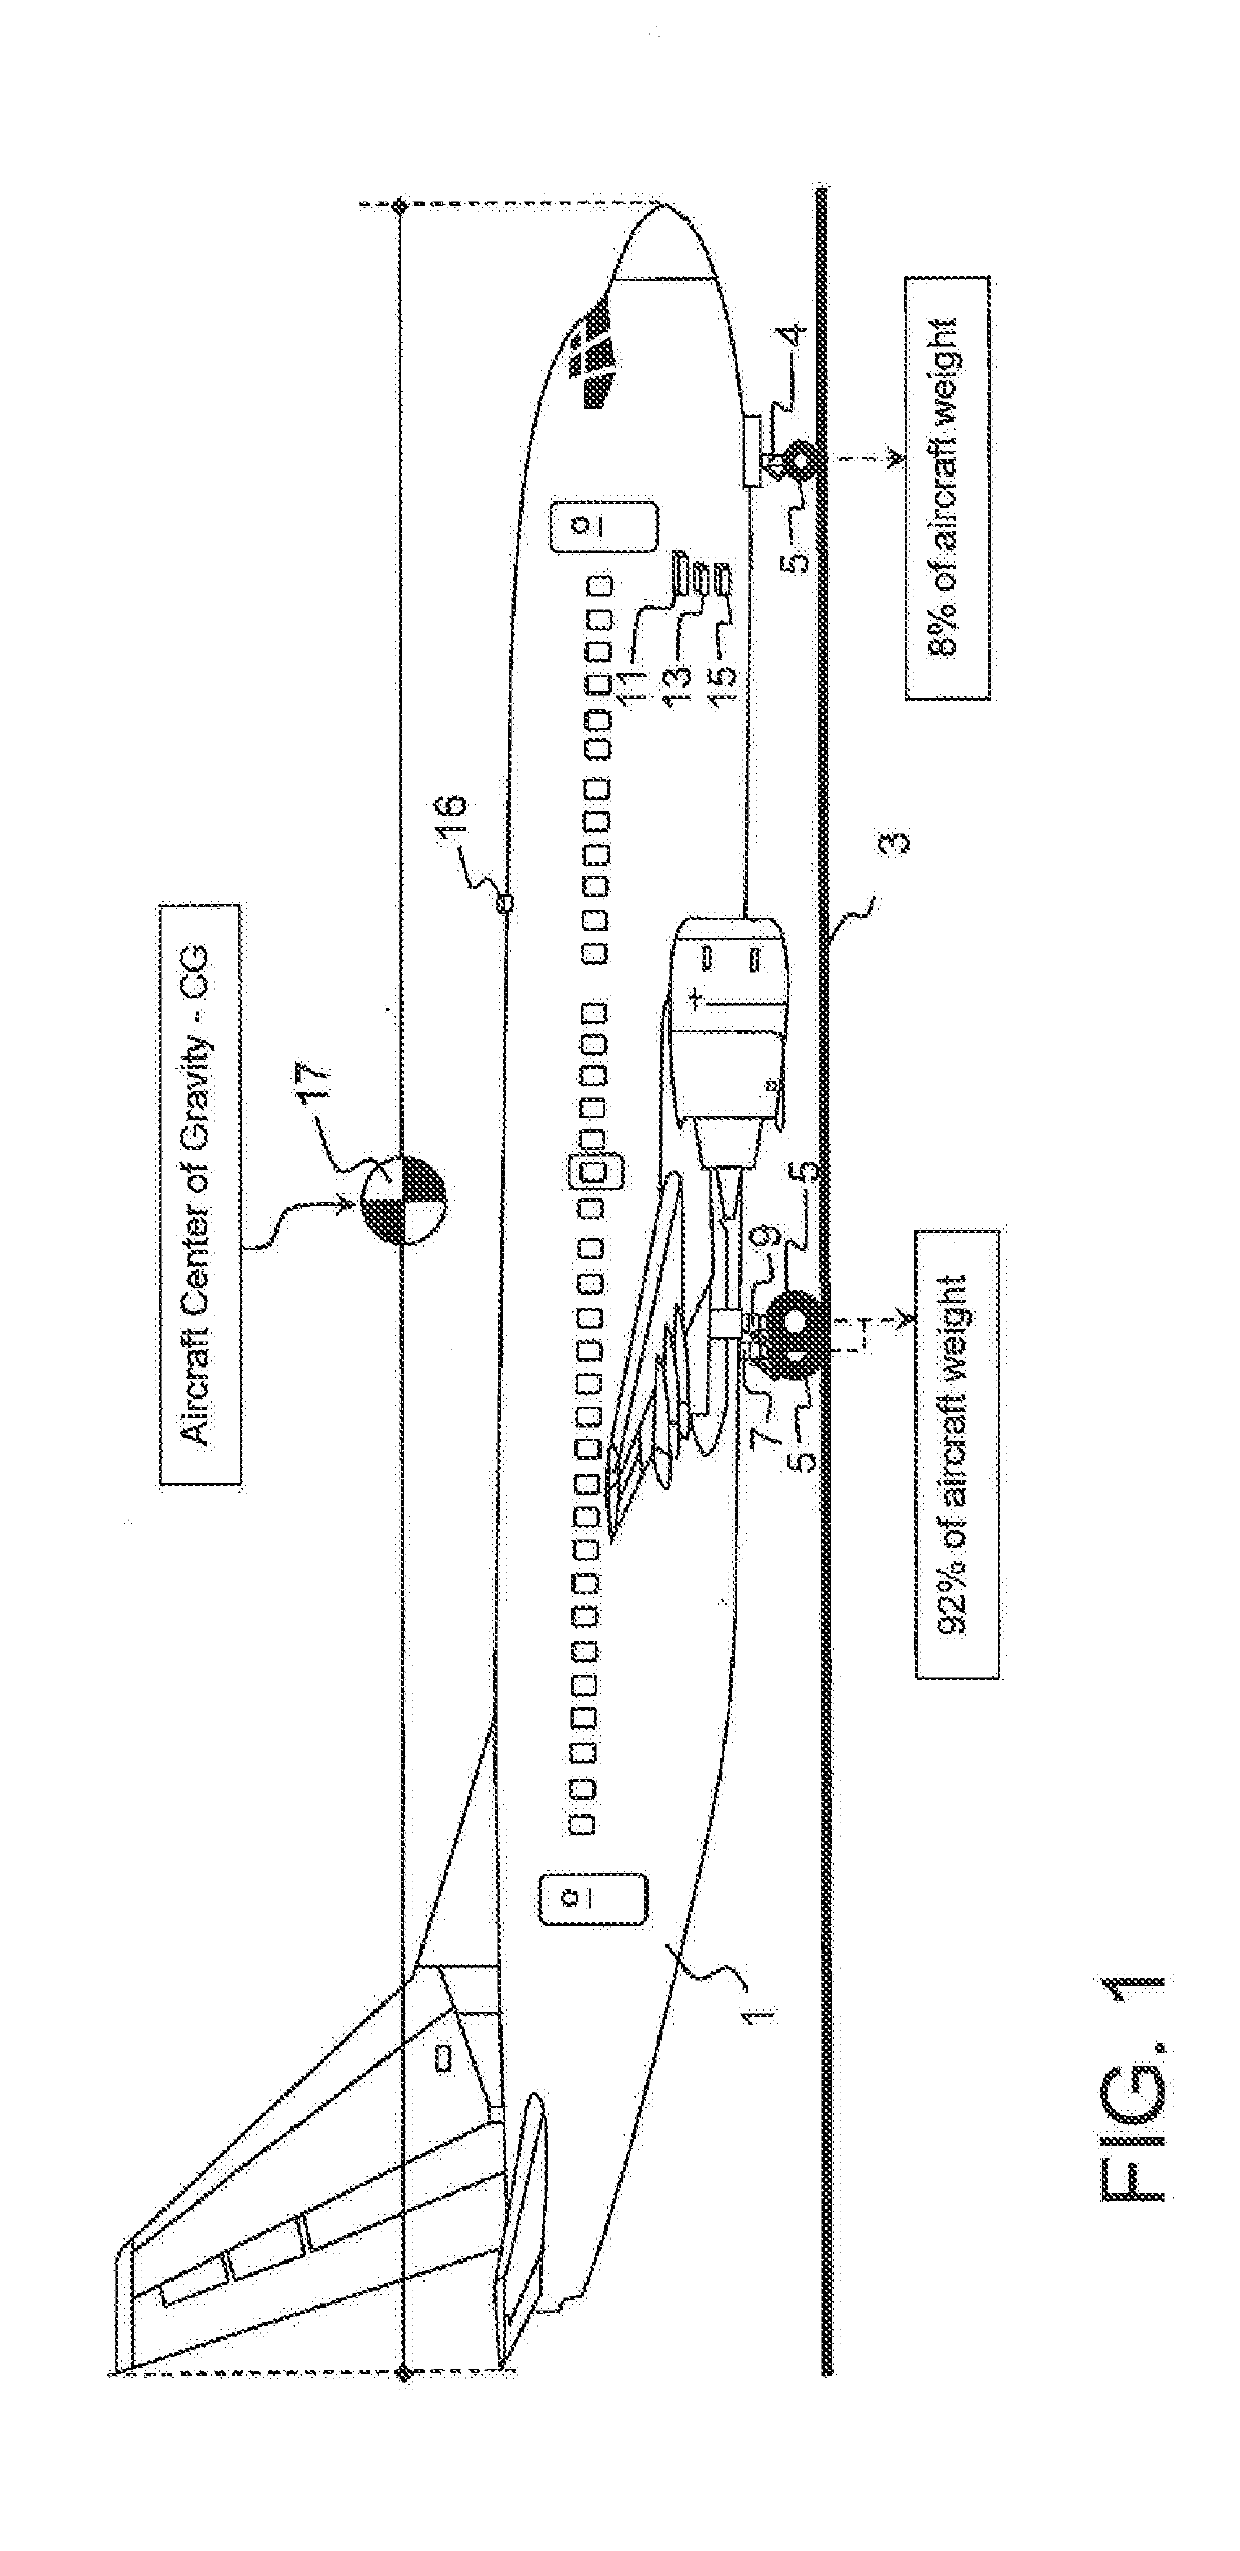 Method for determining, predicting and correcting breakout friction errors influencing aircraft telescopic landing gear strut pressures